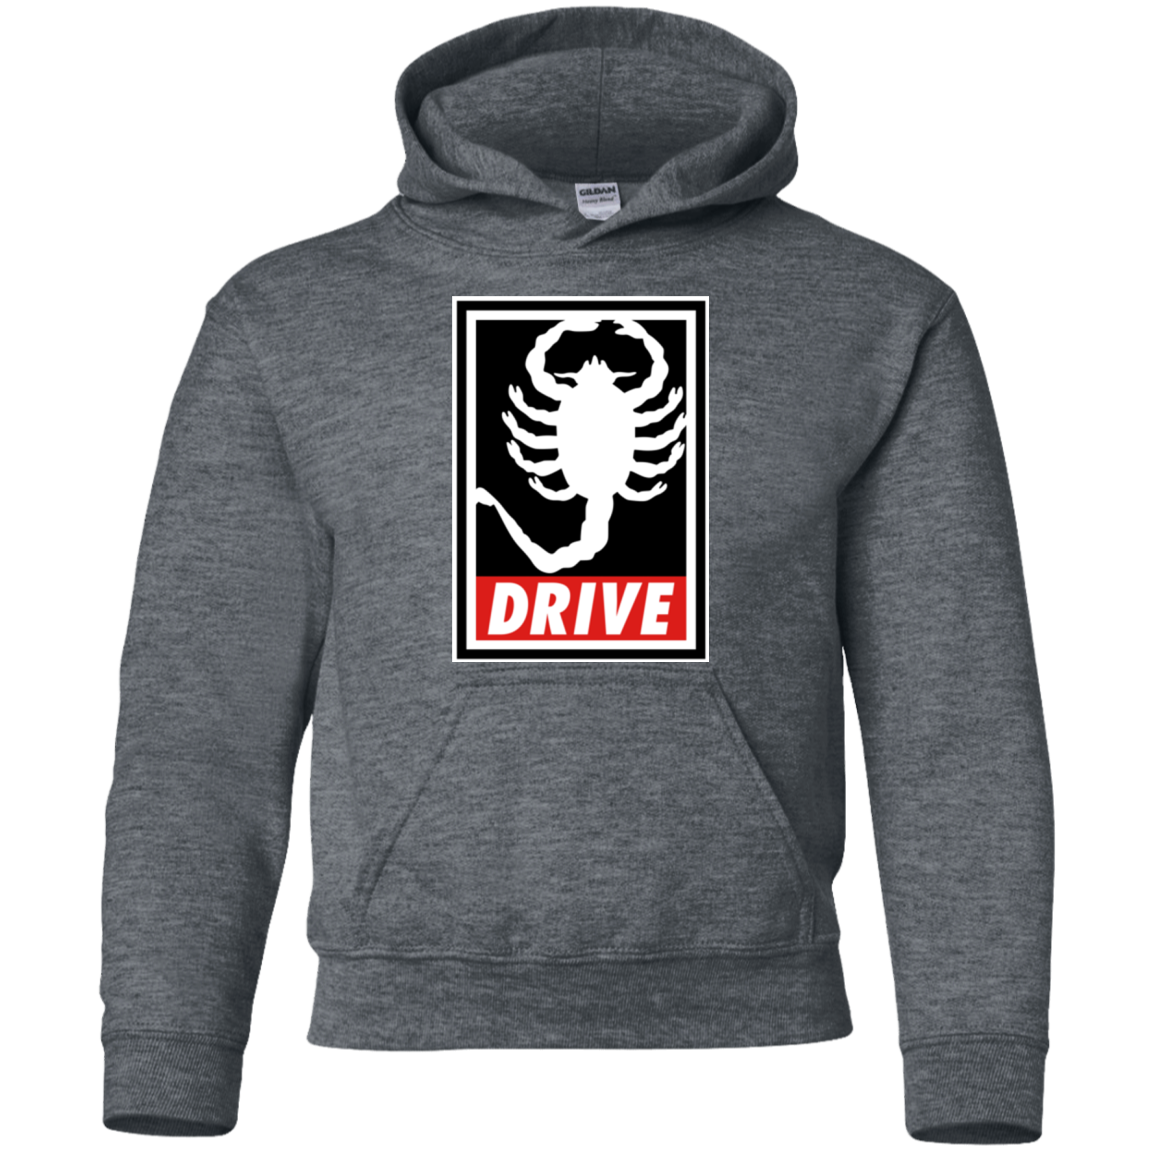 Obey and drive Youth Hoodie